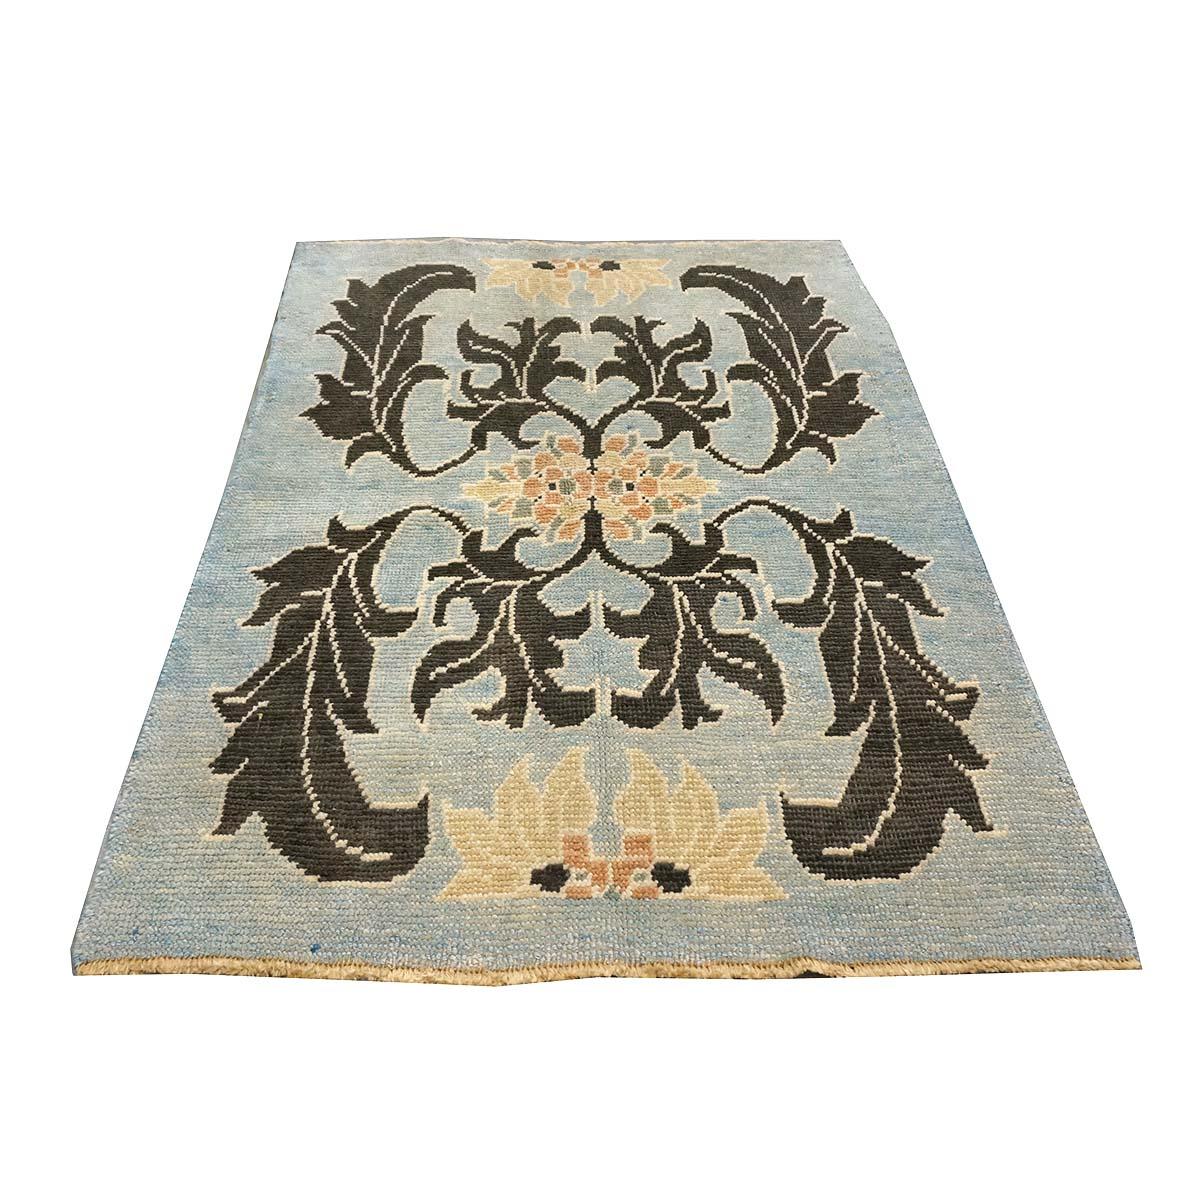  Ashly Fine Rugs presents a hand-woven recreation of an Antique Irish Donegal carpet. Created by our in-house designers and woven by the master weavers of Turkey, these rugs are made with the exact methods from which they were originally made in